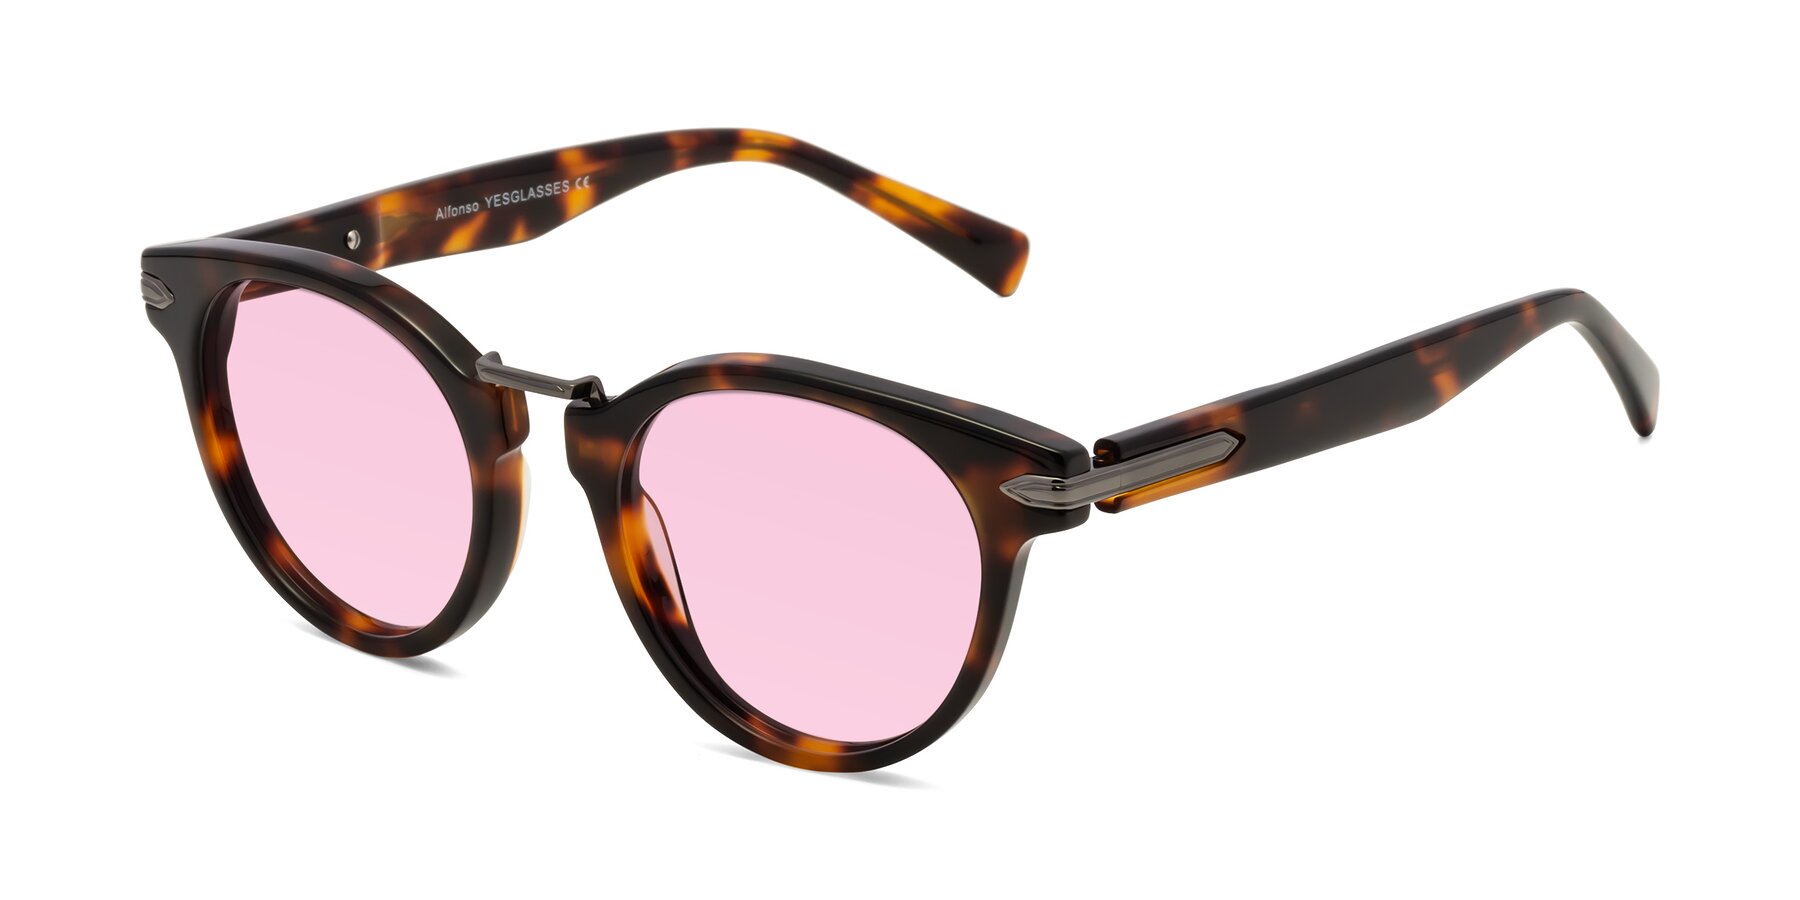 Angle of Alfonso in Tortoise with Light Pink Tinted Lenses